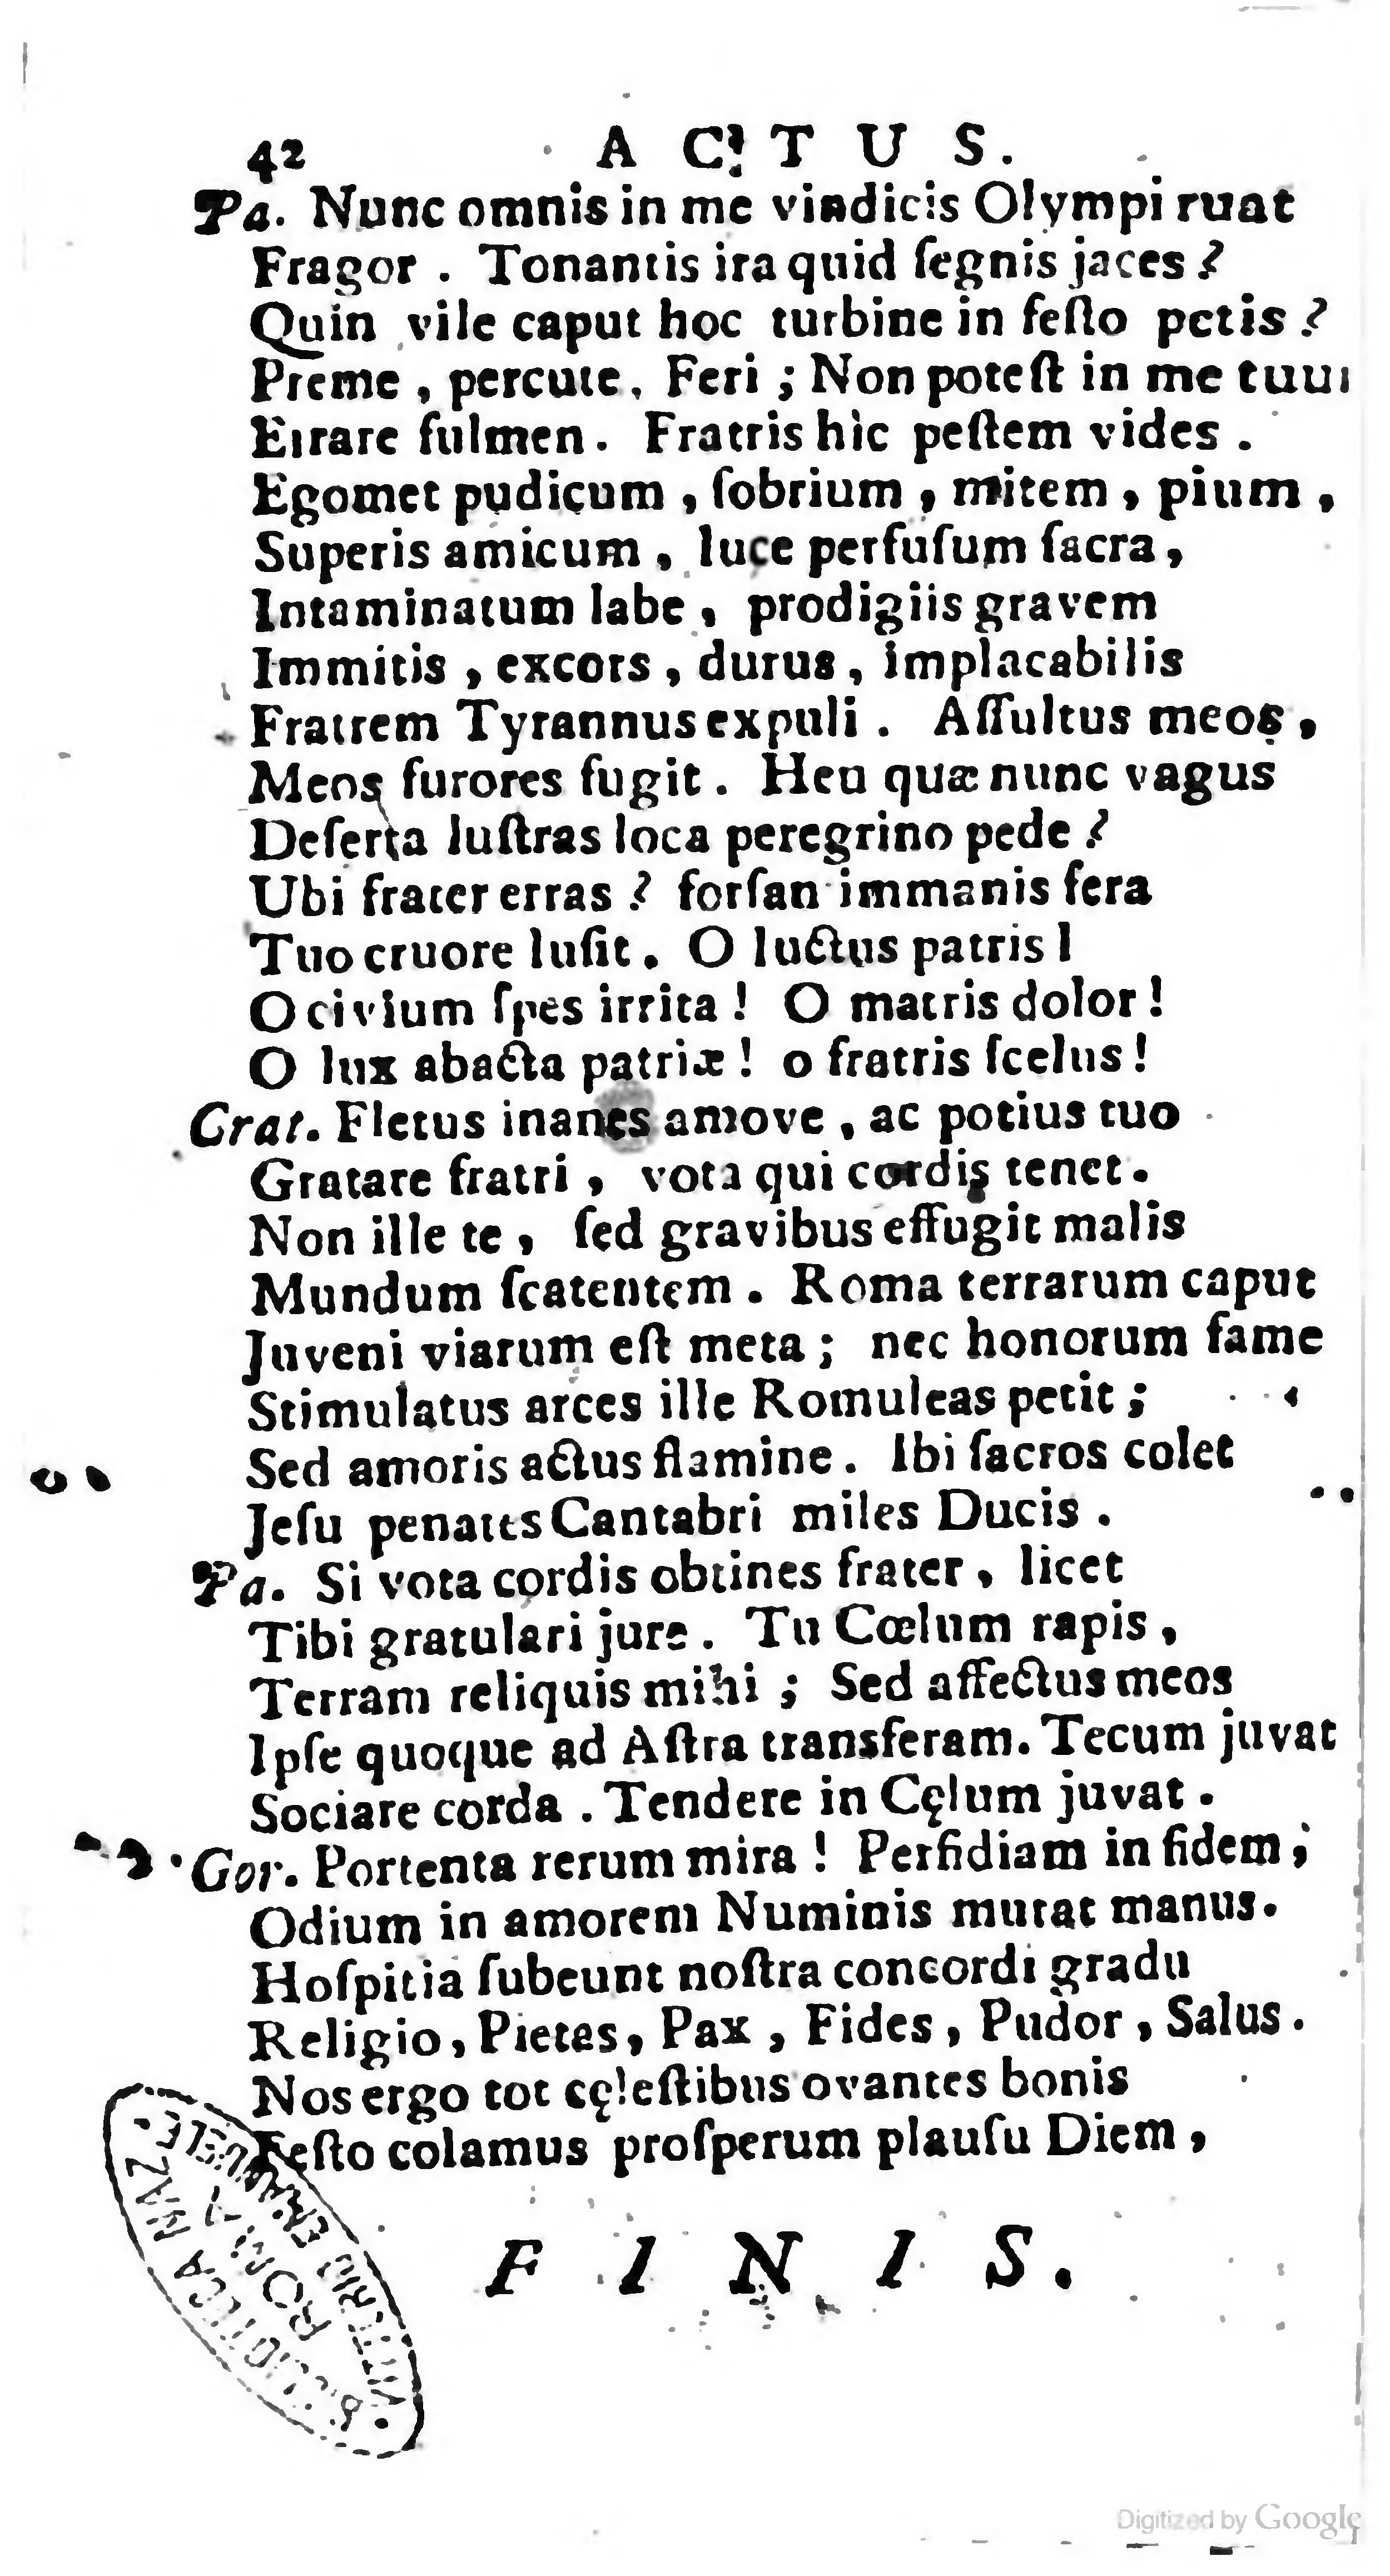 Luccari 1709, page 42, png image